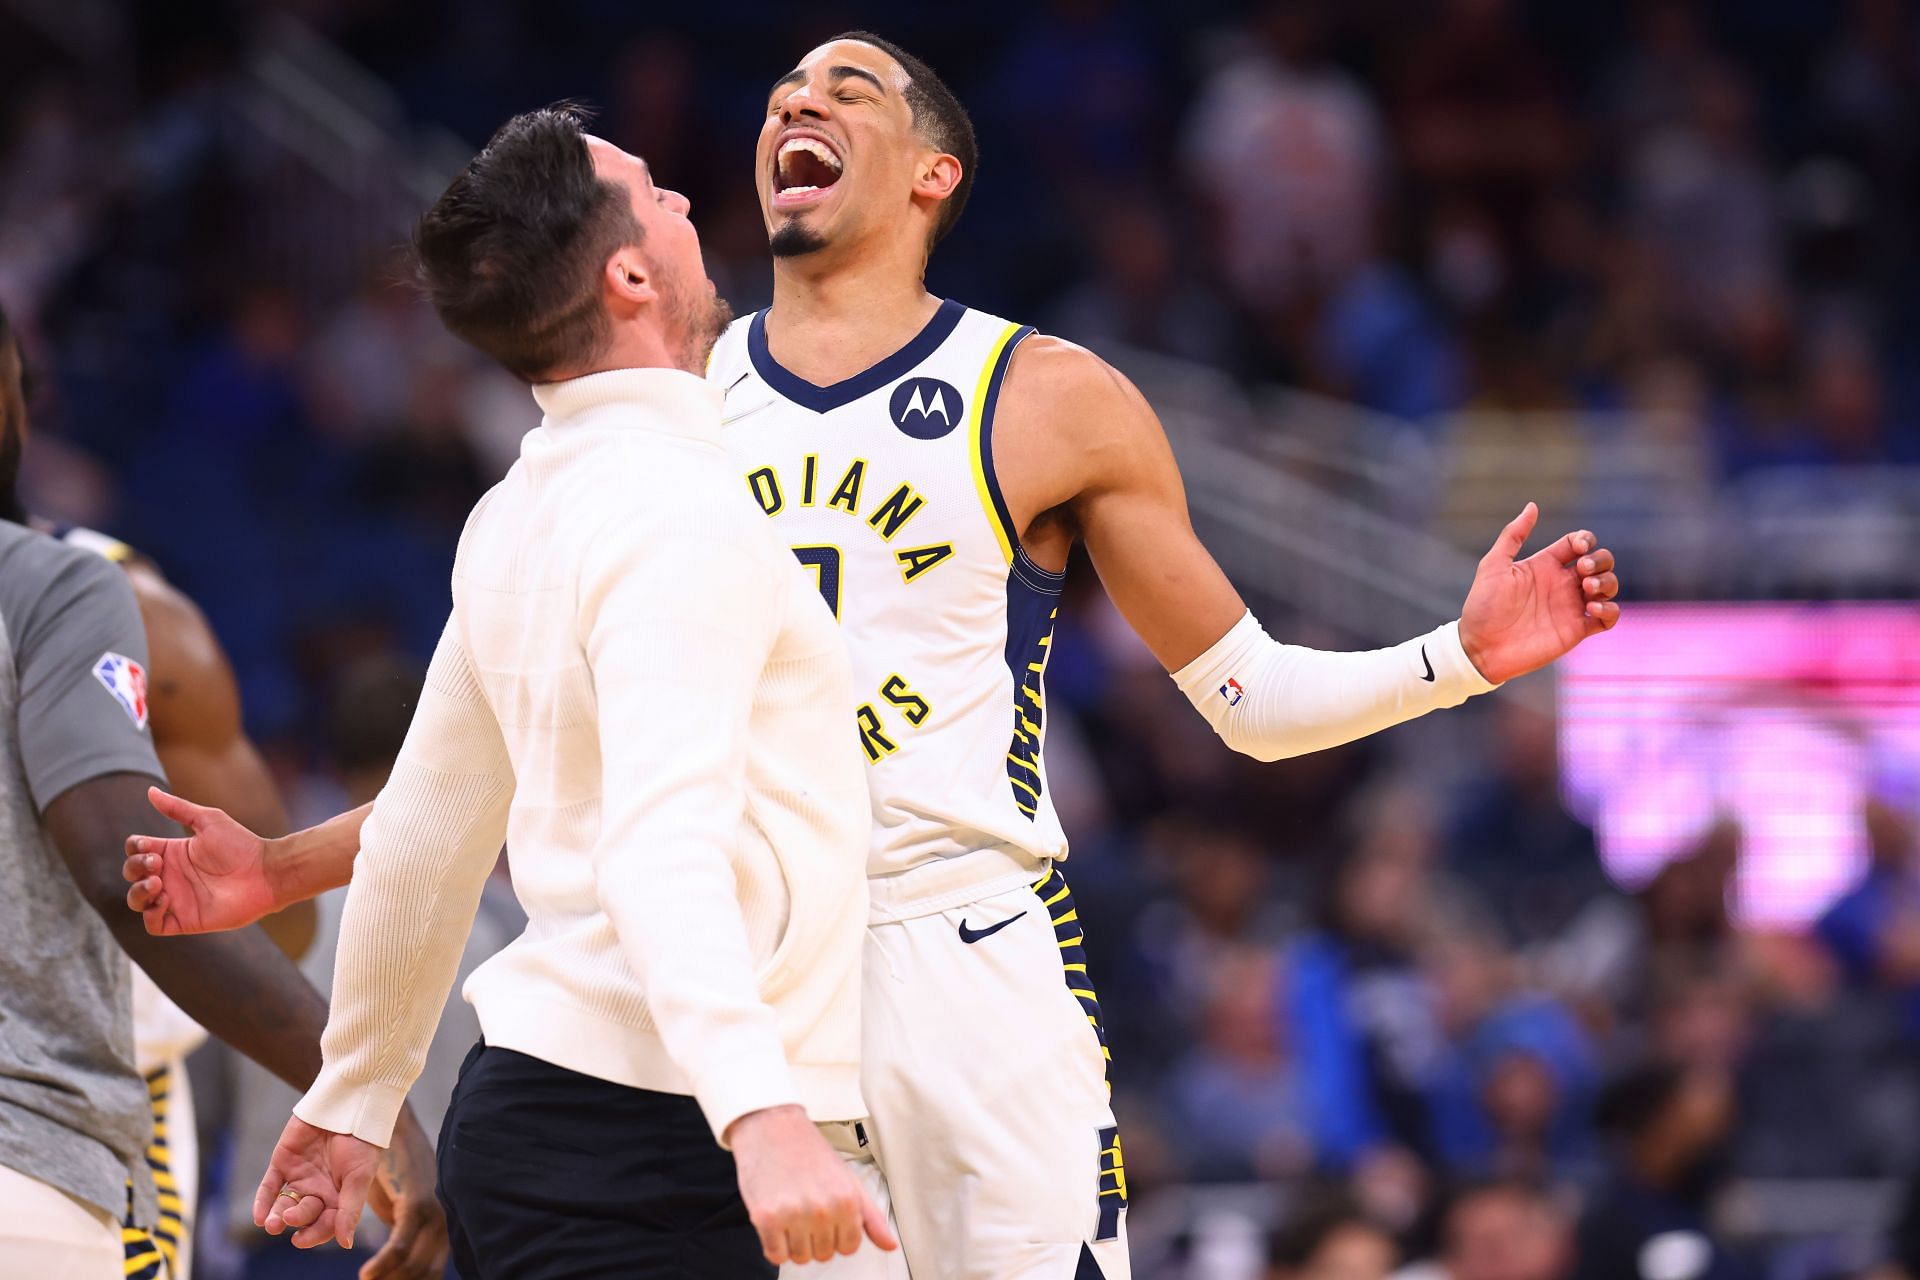 Tyrese Haliburton is the current face of the Indiana Pacers